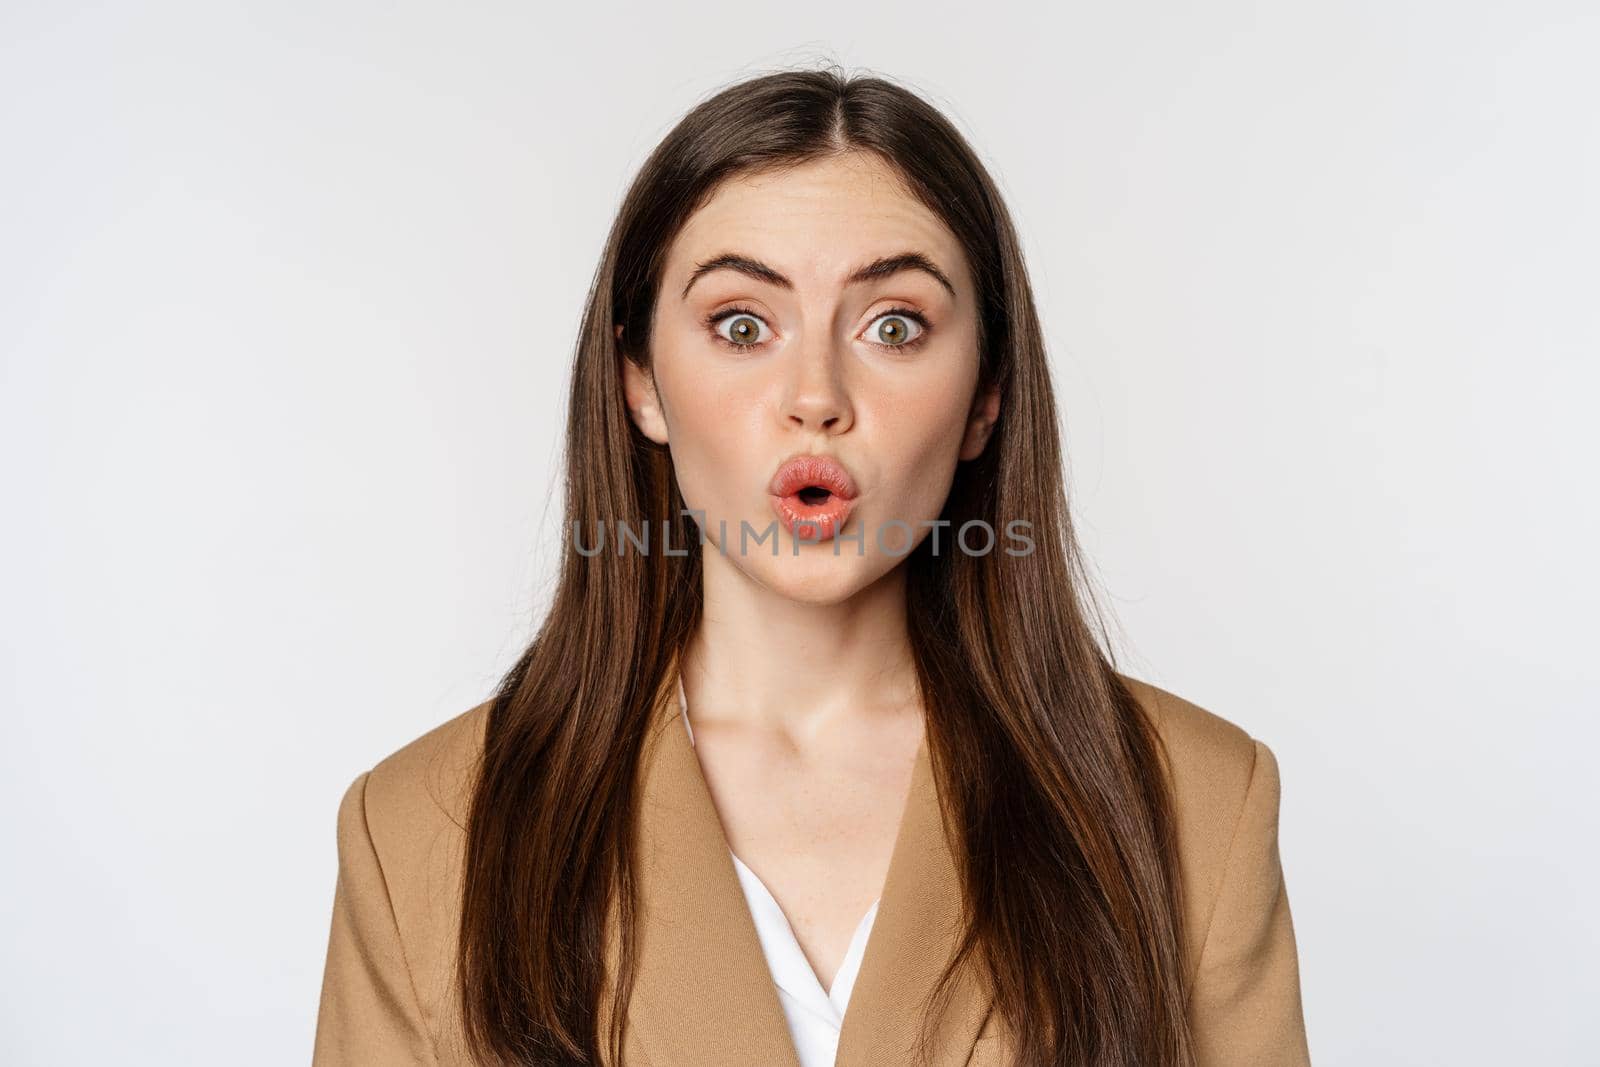 Close up portrait of surprised, amazed businesswoman, say wow, staring impressed at camera, fascinated face expression, white background.